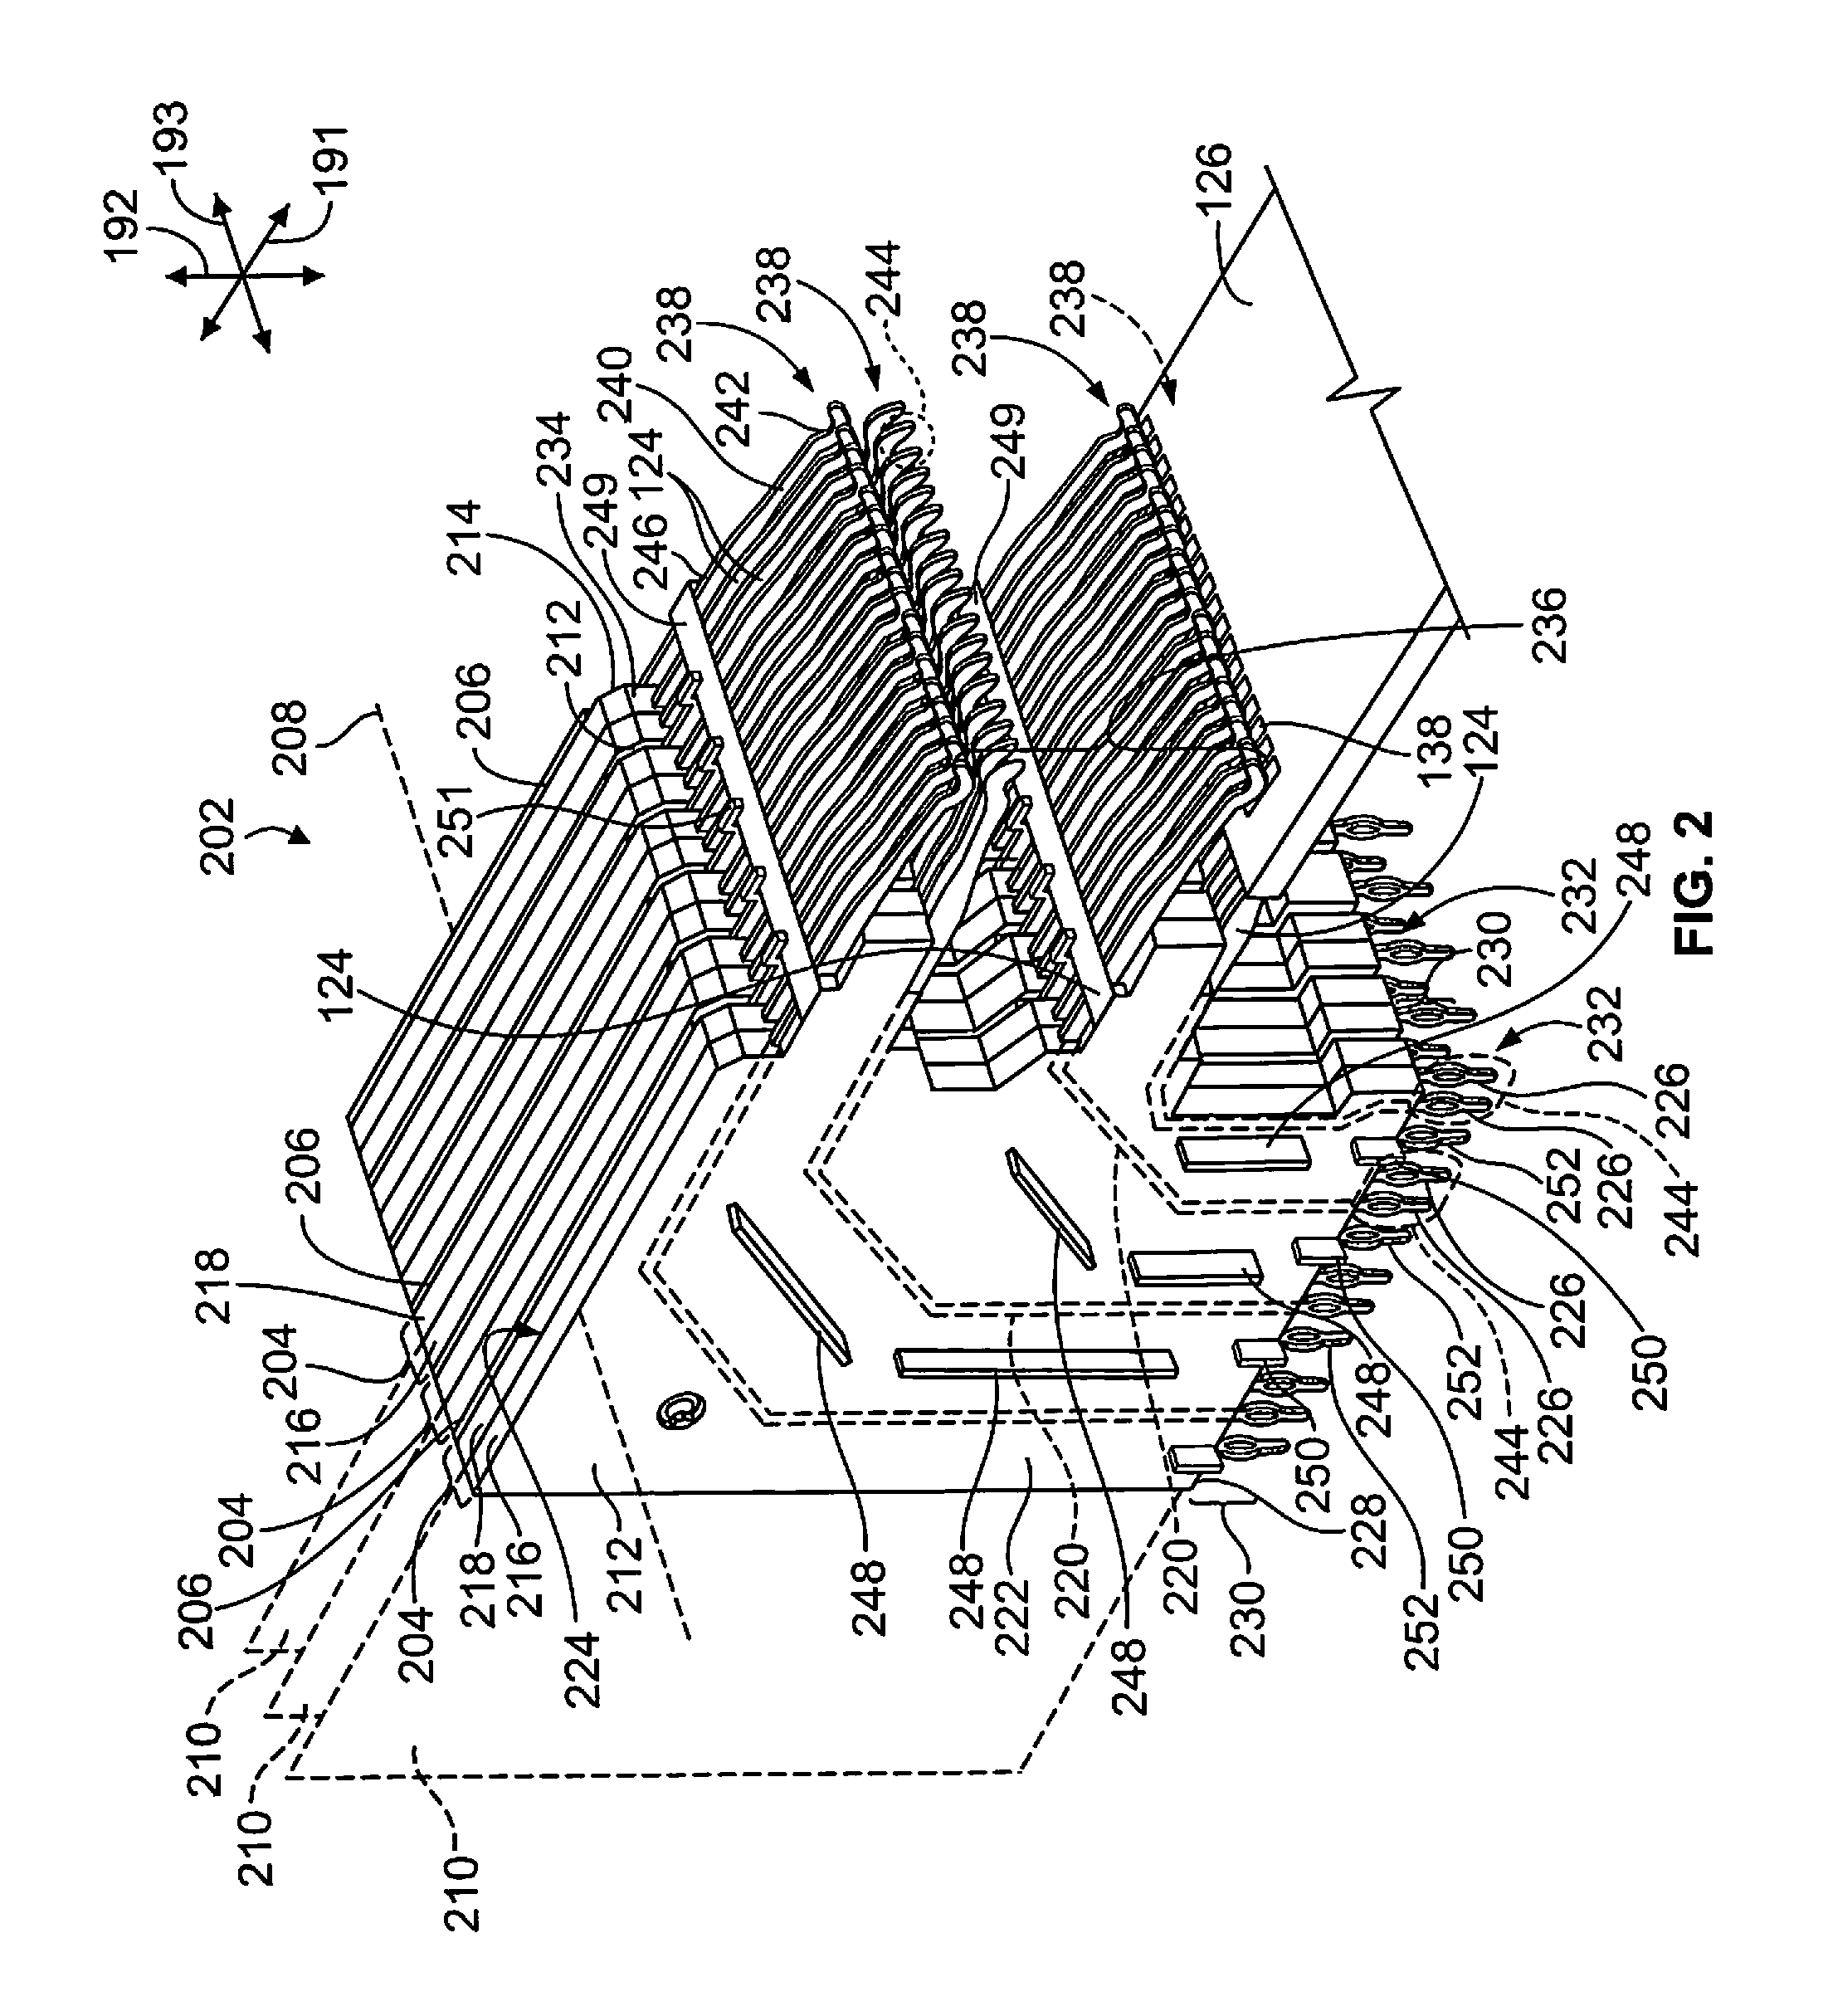 Electrical connector having contact modules